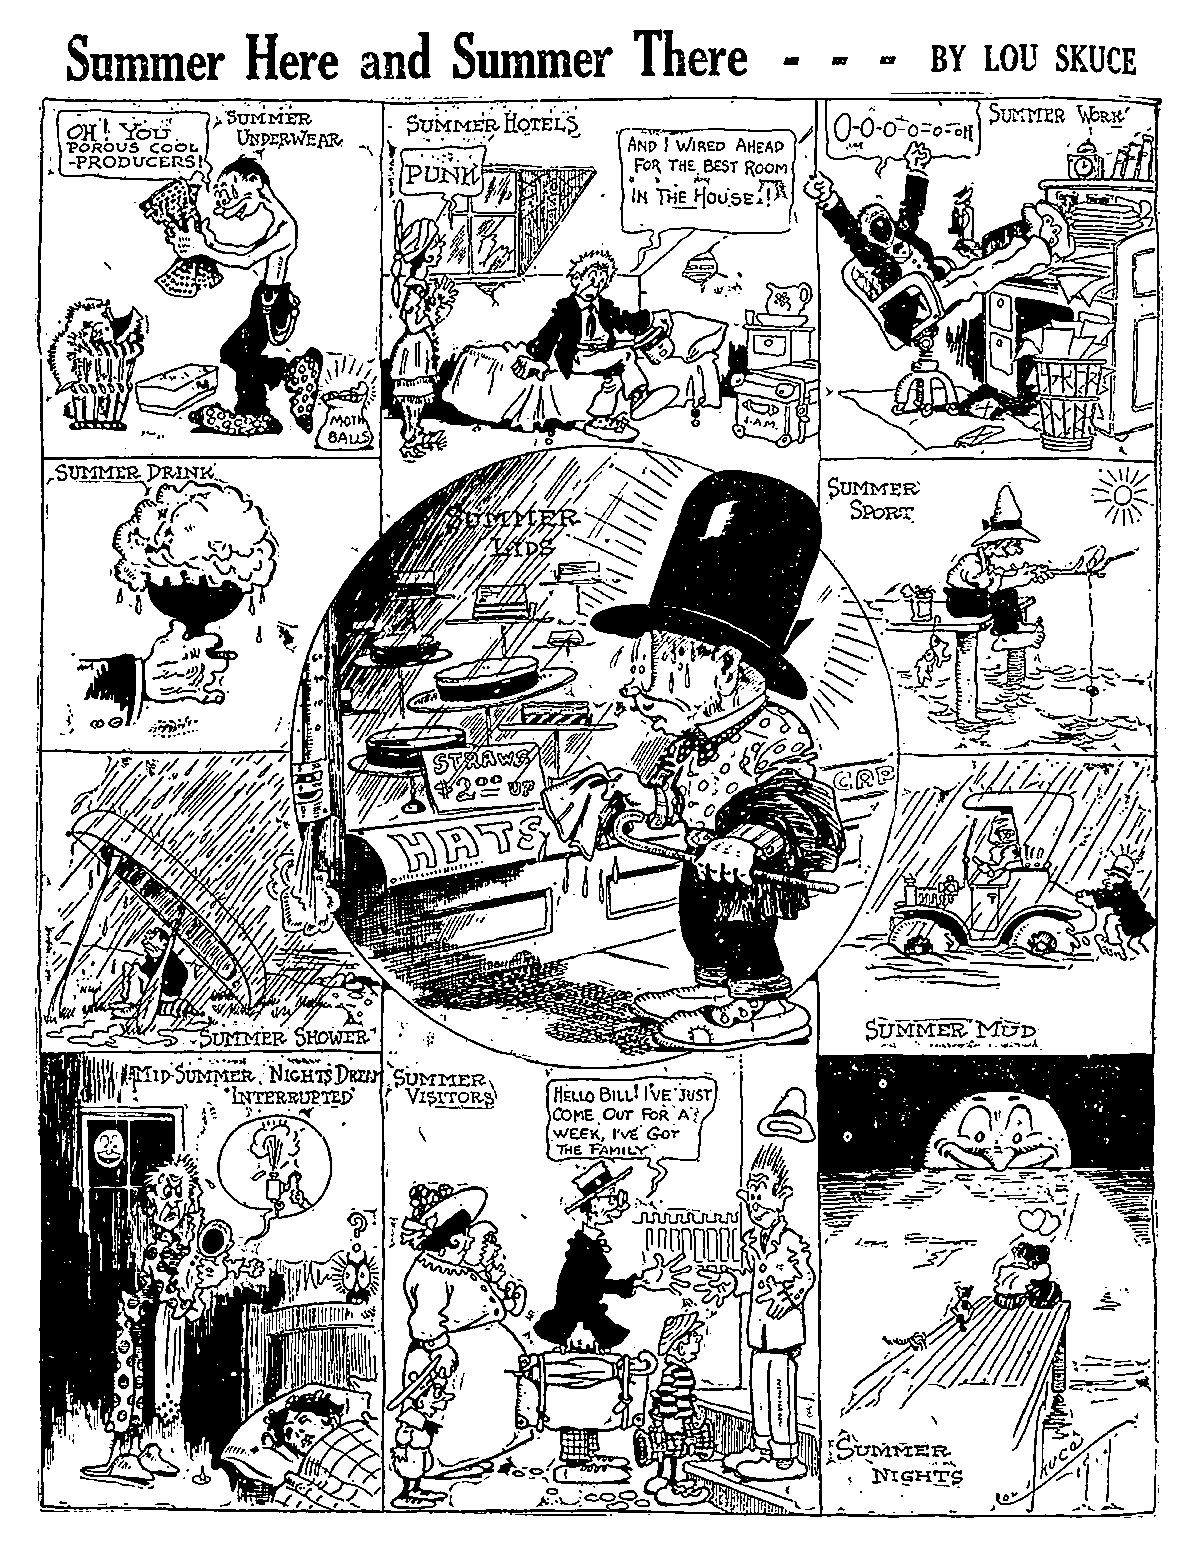 Editorial cartoon by Lou Skuce for the Toronto Sunday World, 1914